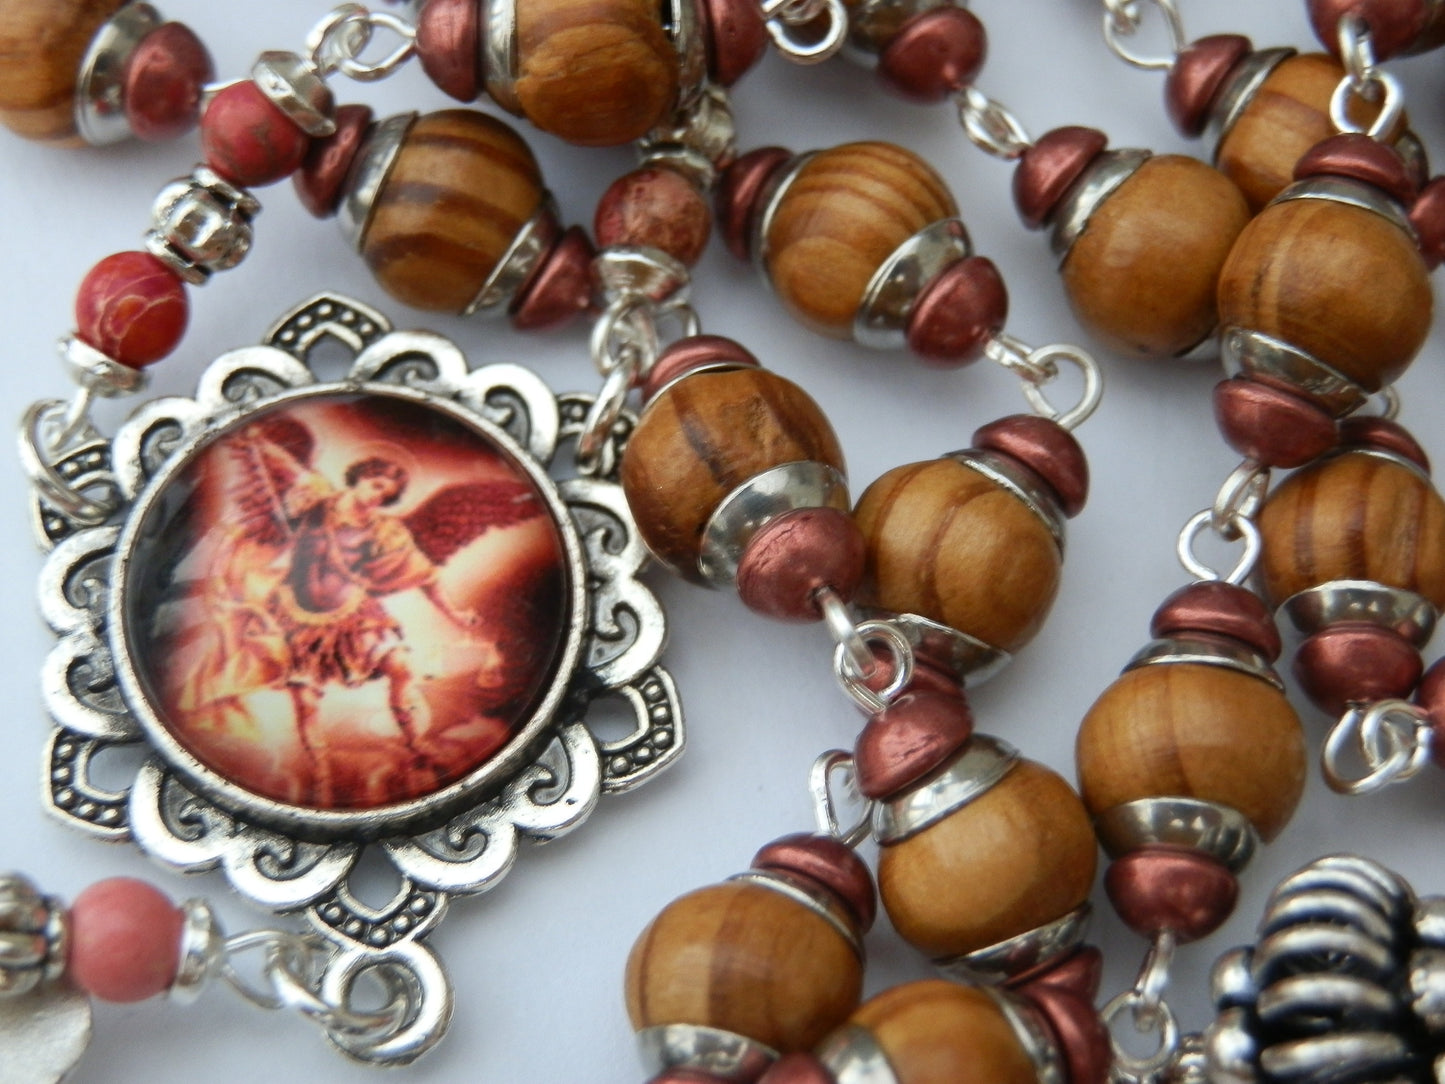 St. Michael wooden Rosary beads, Holy Trinity Rosaries, St. Michael the Archangel Rosaries, Wedding Rosary gift, Rosaries, prayer beads.